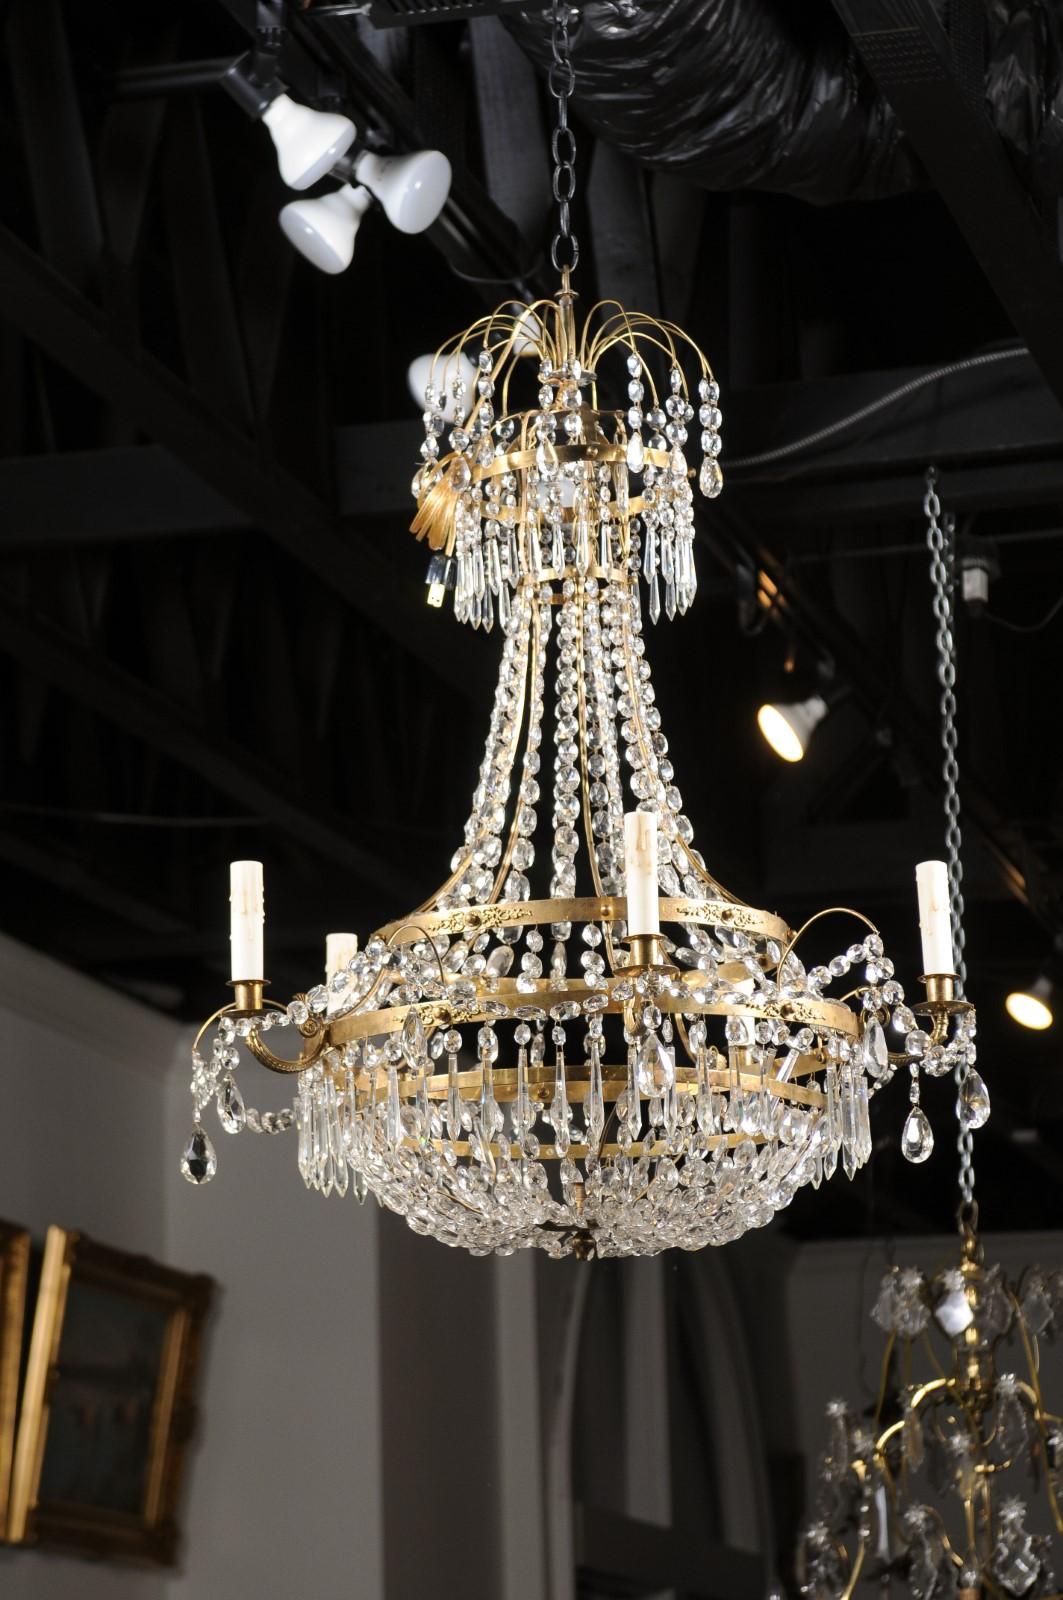 Swedish, 1810s Gustavian Period Five-Light Crystal and Brass Basket Chandelier For Sale 4